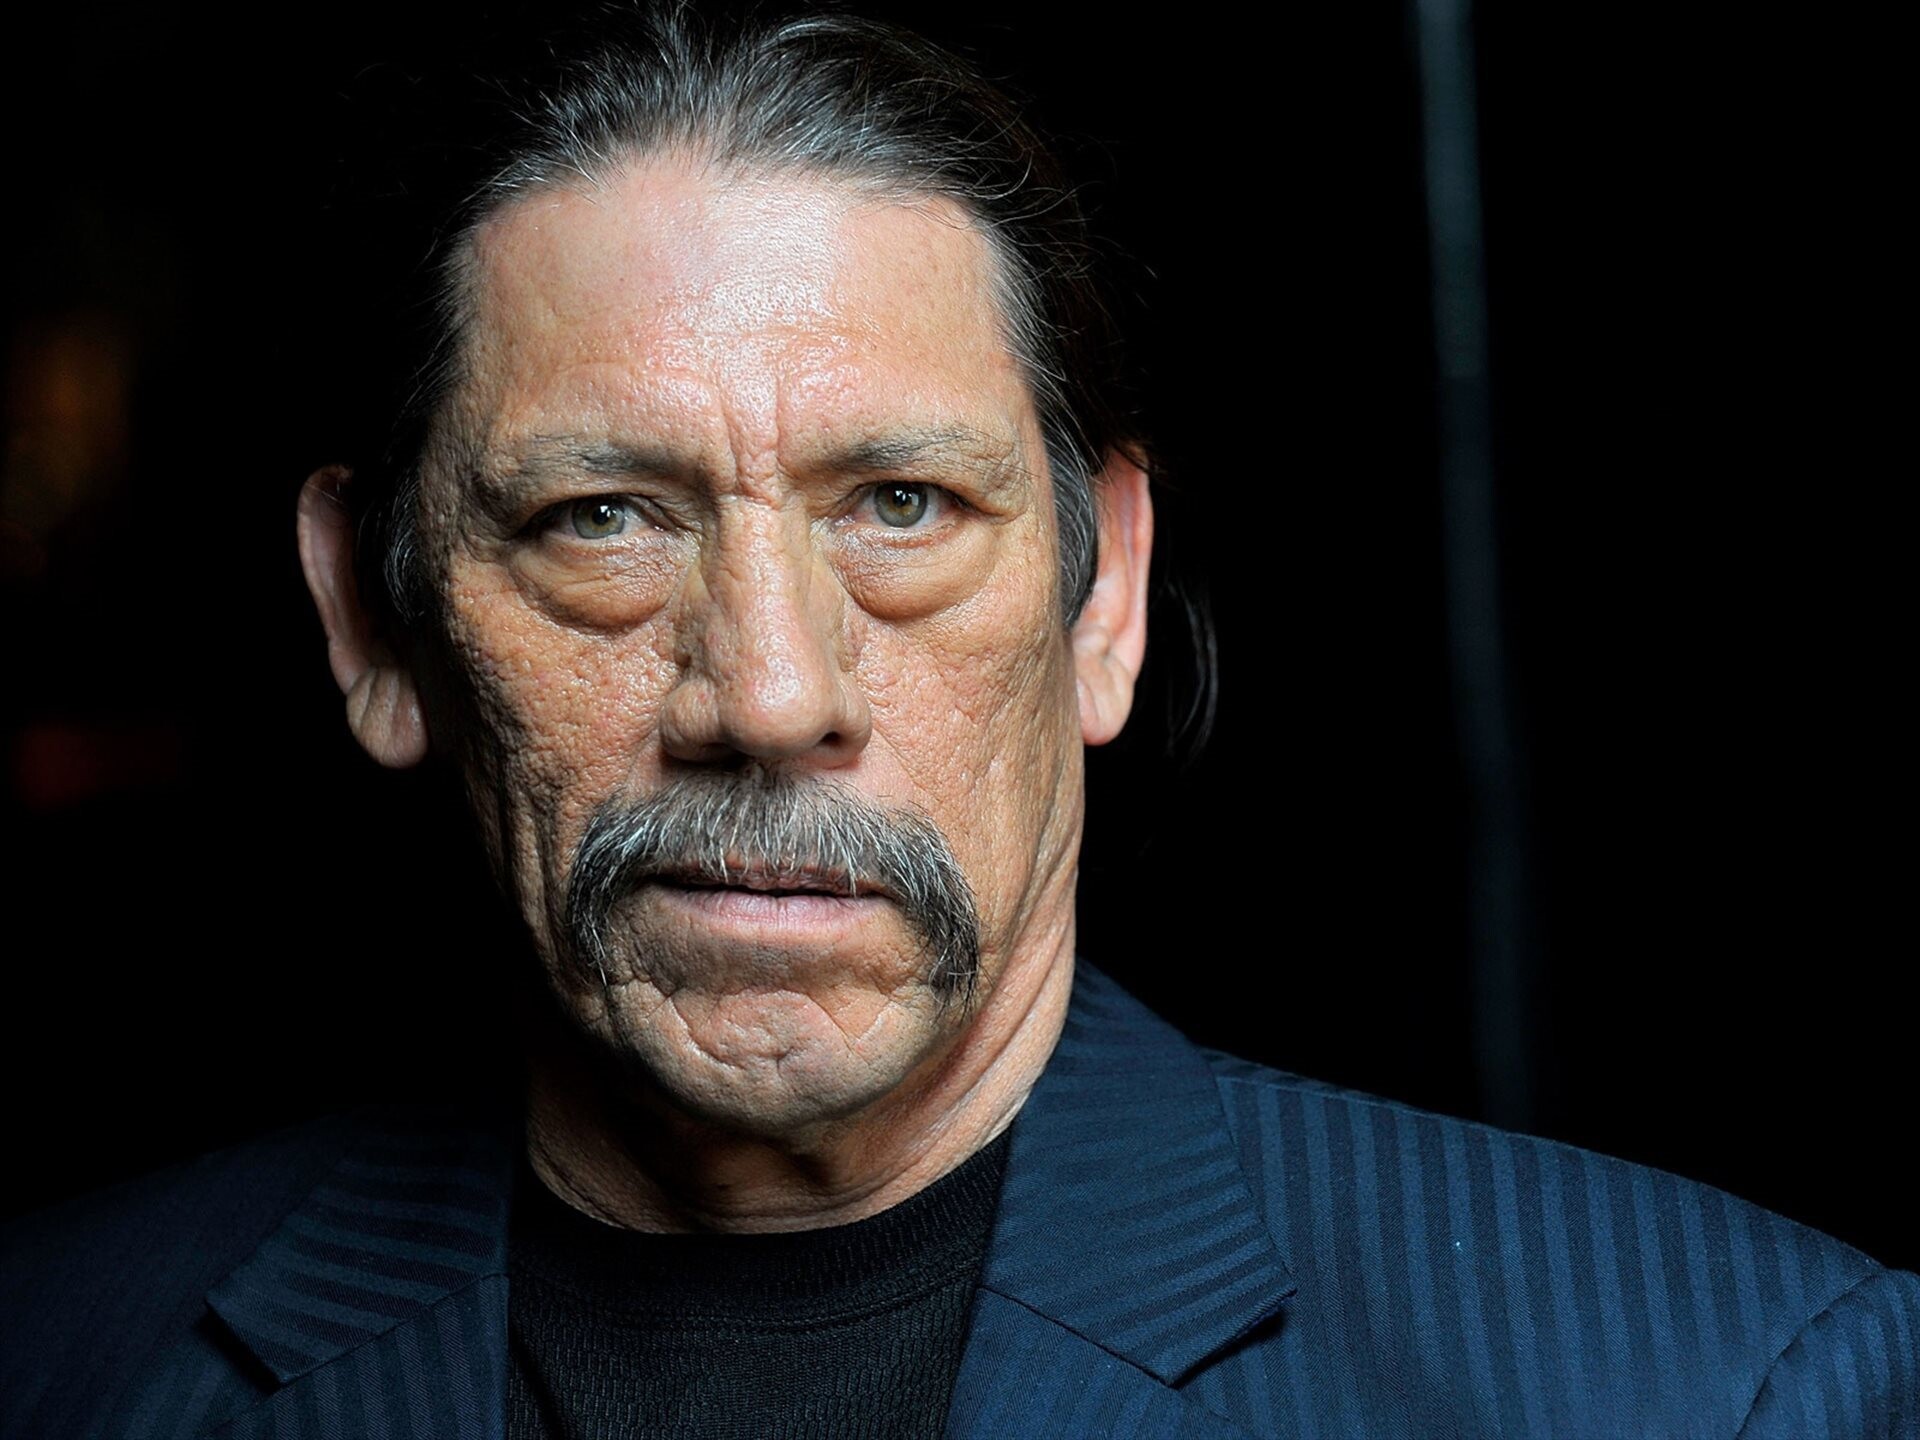 Danny Trejo: Trejo, An entrepreneur, A series of restaurants in Los Angeles, A potential lead actor in action films. 1920x1440 HD Background.